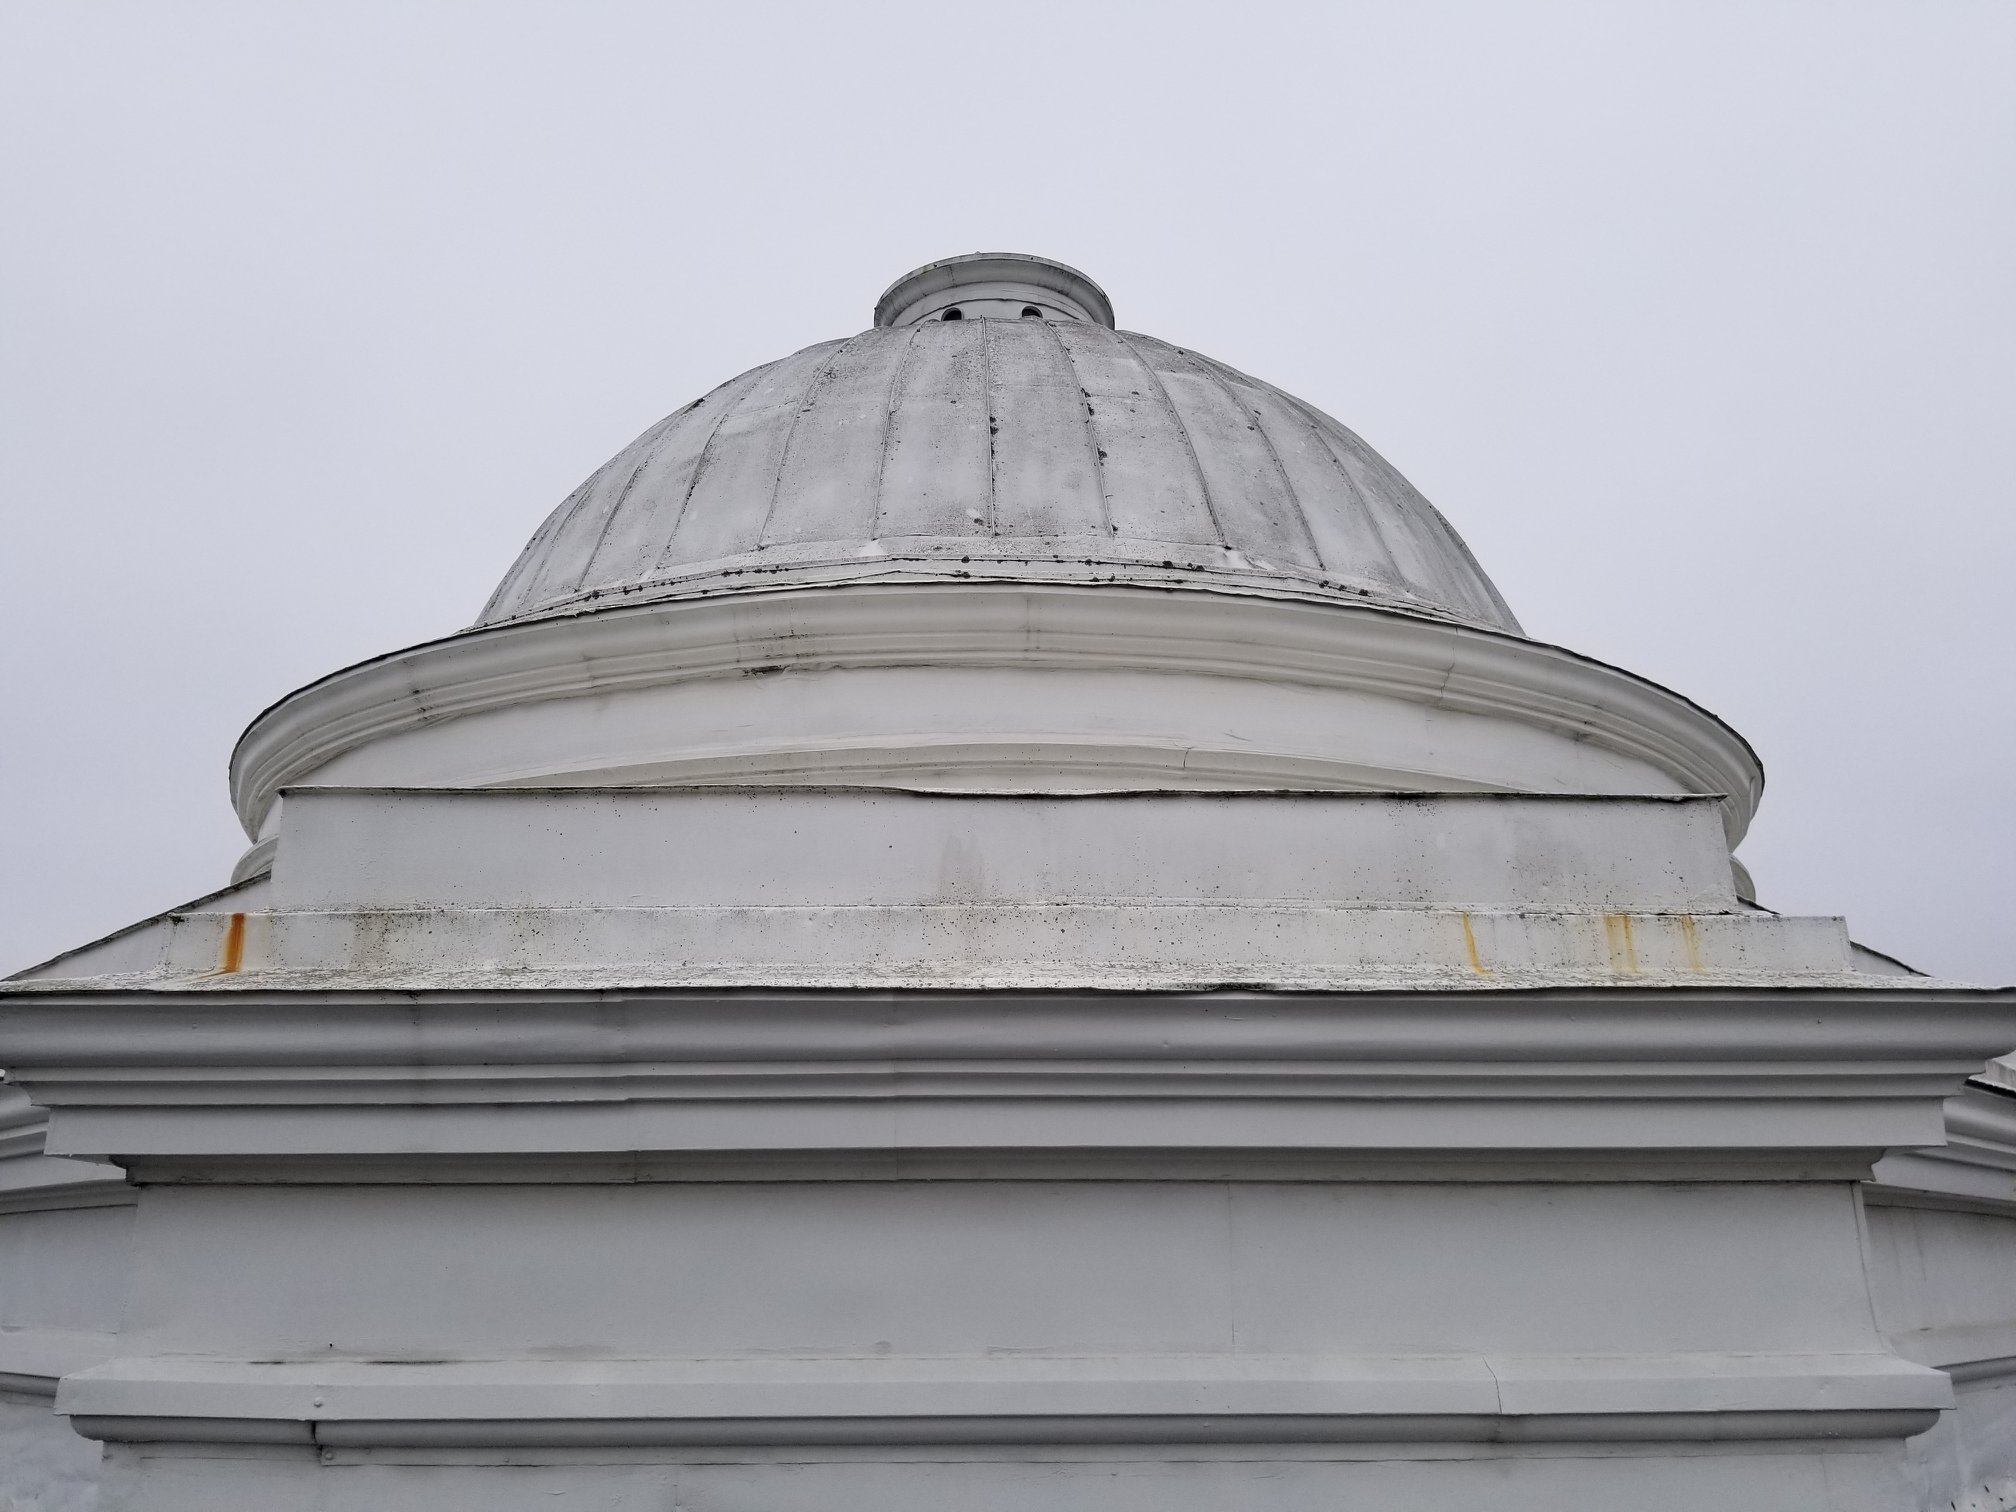 the famous old building’s well-known dome was in dire need of cleaning and repair